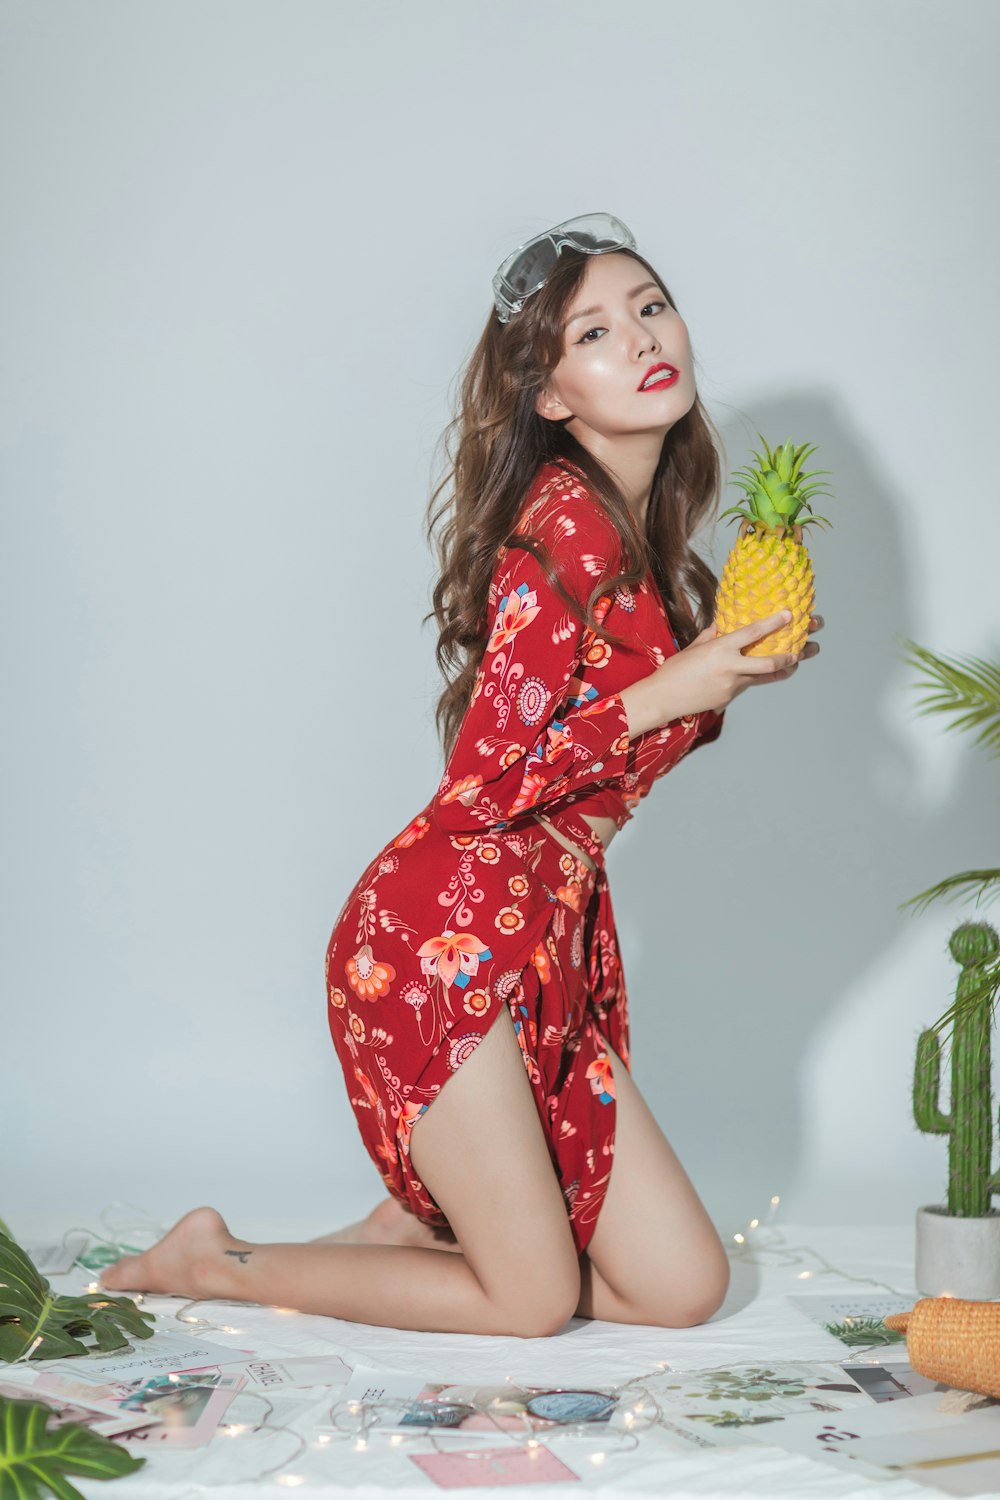 a woman in a red dress holding a pineapple